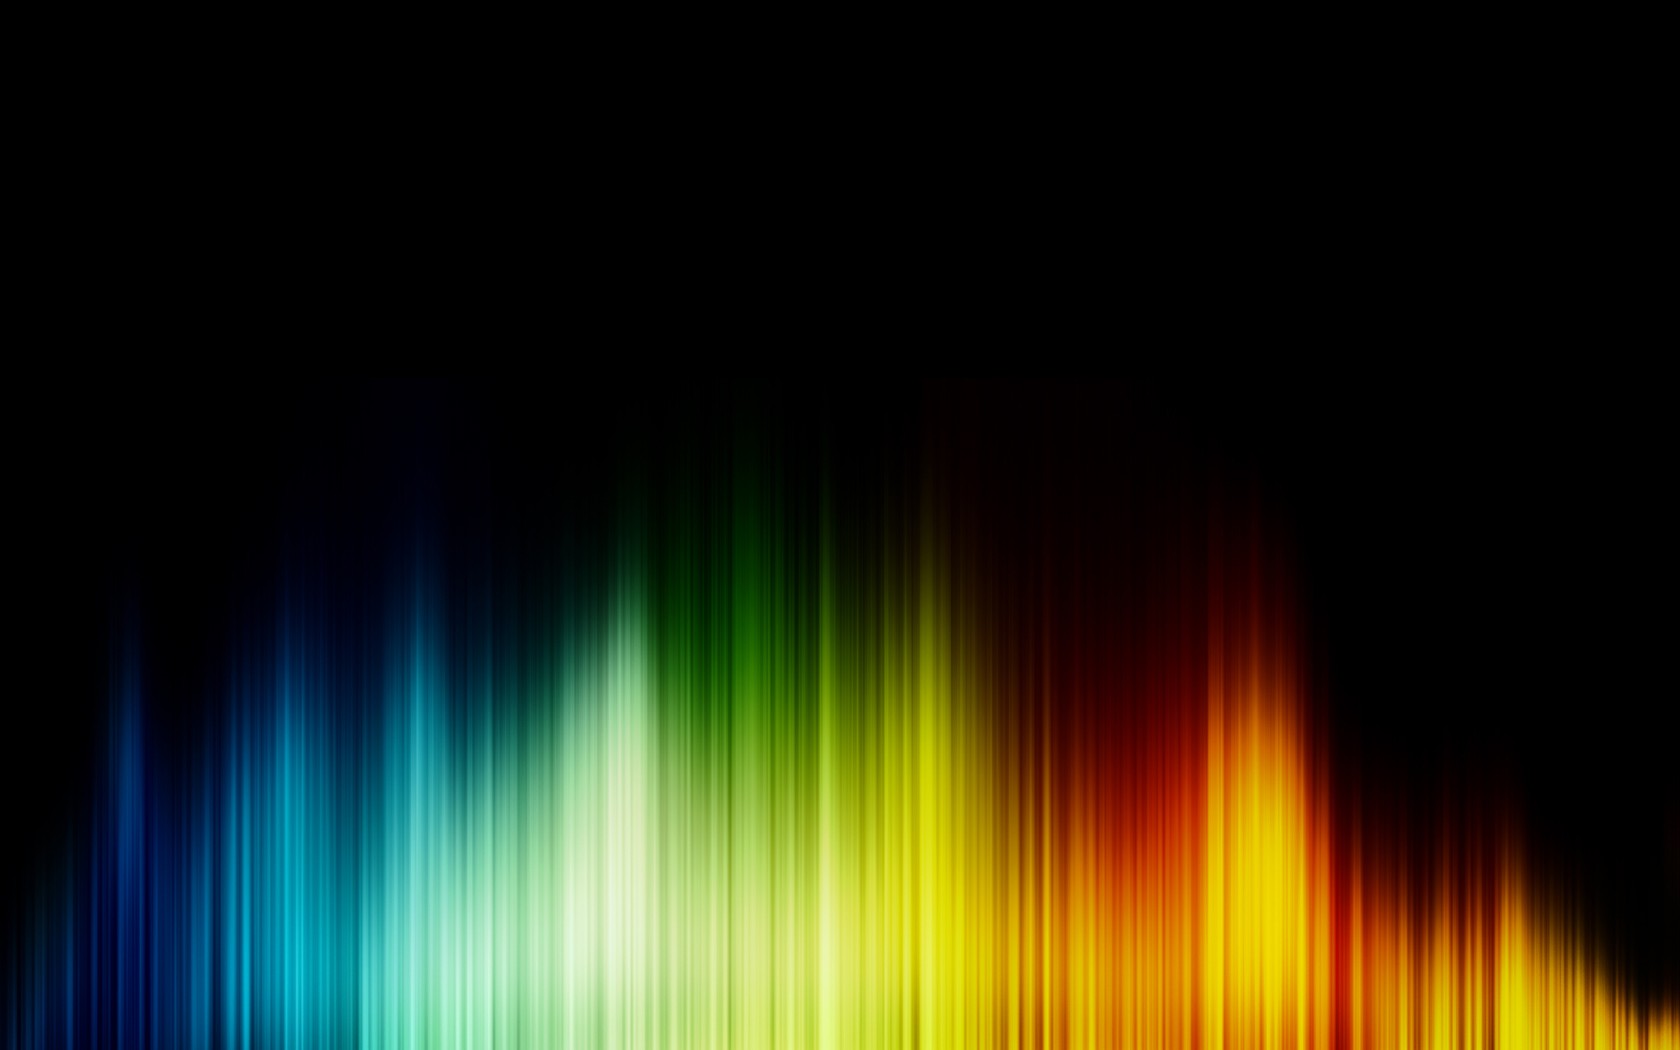 Colorful Audio Spectrum Rainbows Abstract Digital Art Shapes Lines 1680x1050